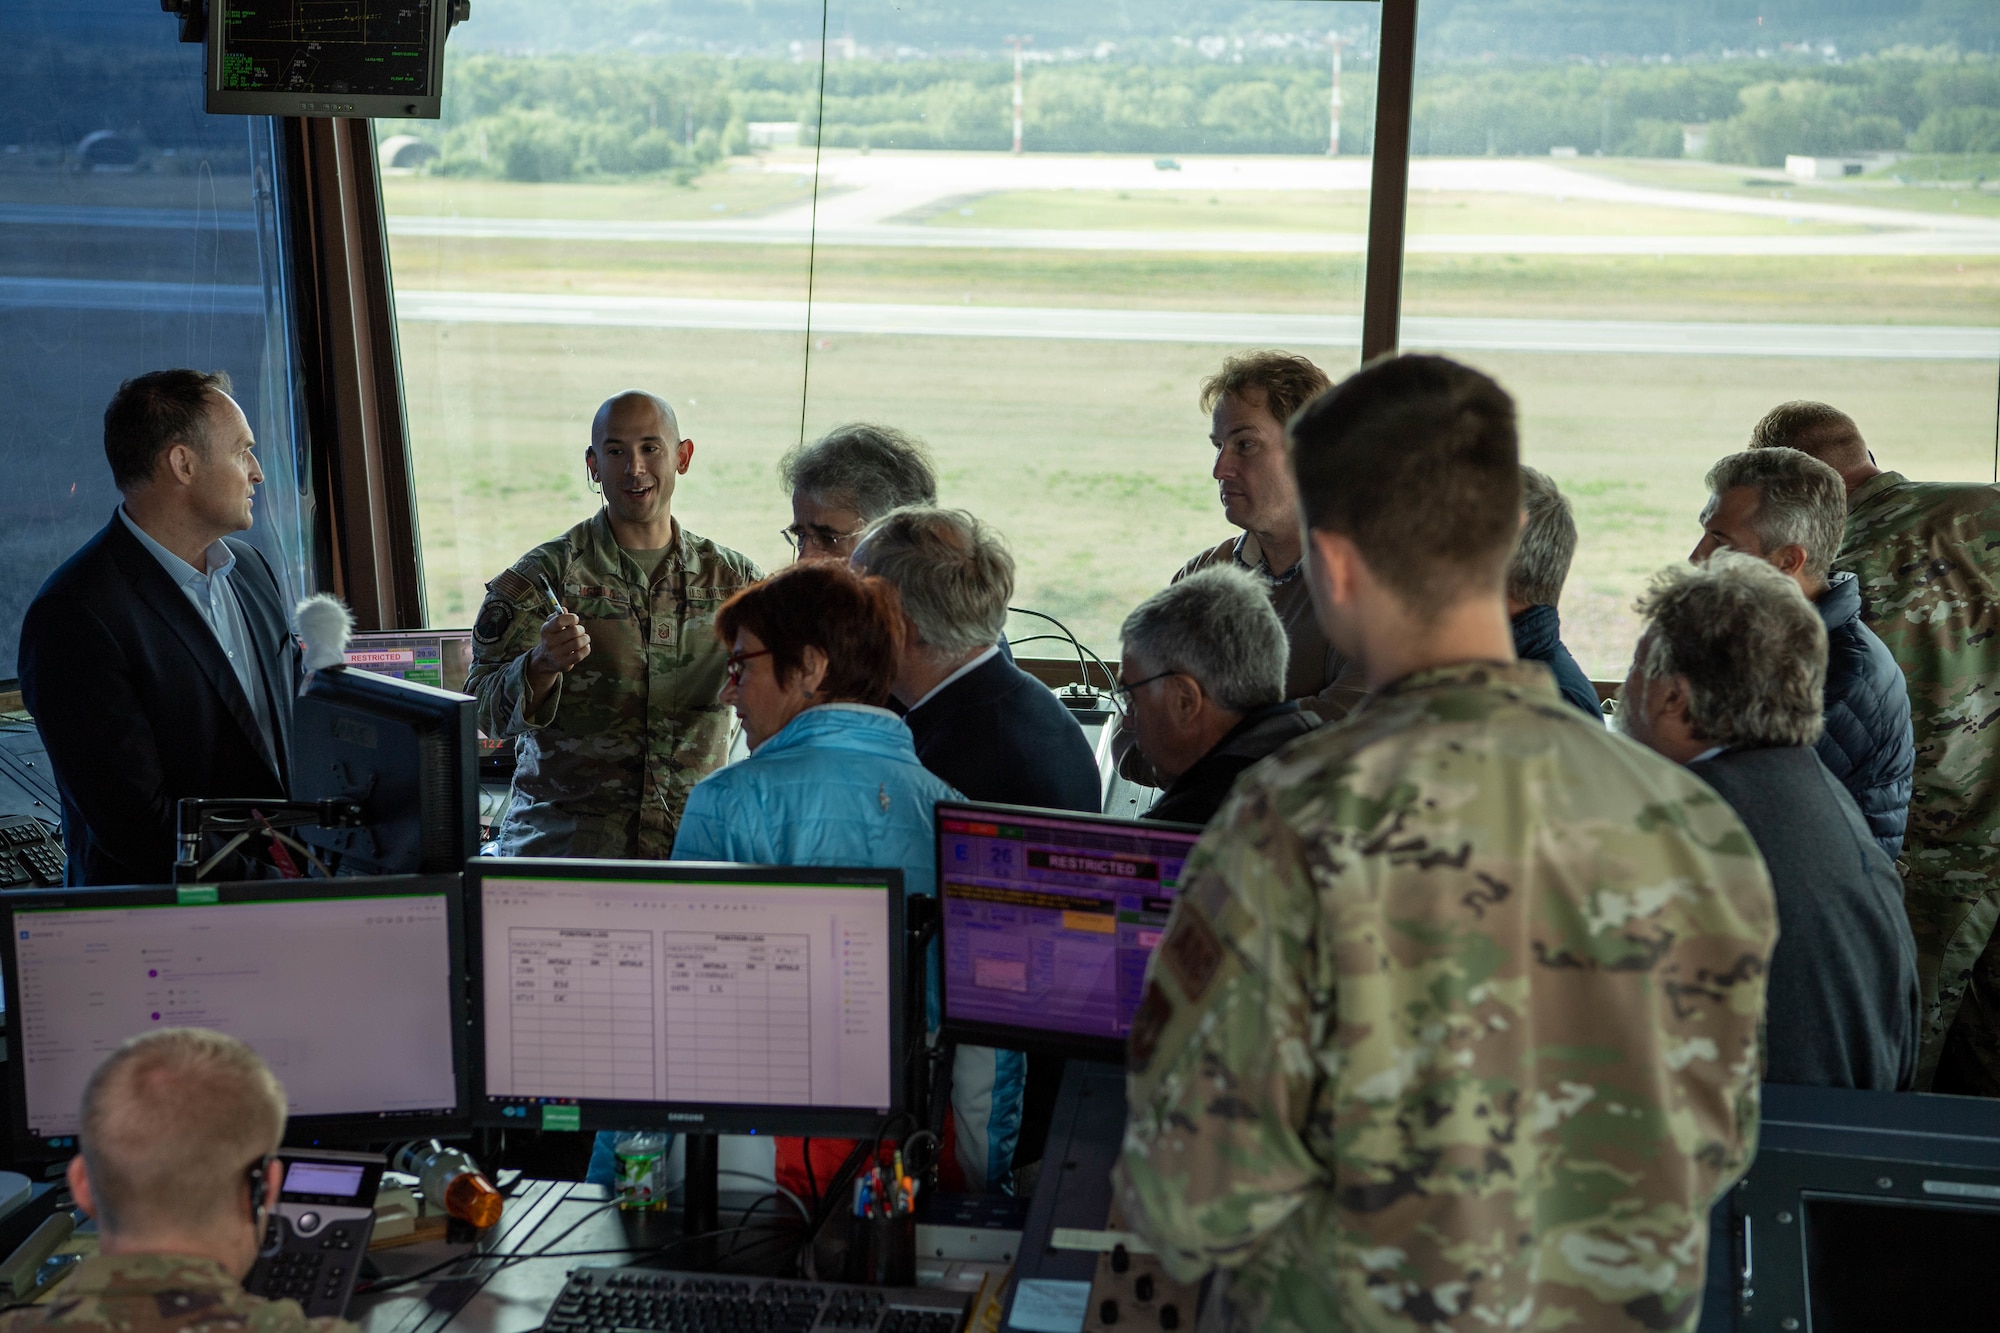 A group of glider pilots from various flying clubs in Rheinland-Pfalz tour the air traffic control tower located at Ramstein Air Base, Sept. 9, 2022, during a Mid-Air Collision Avoidance Meeting.